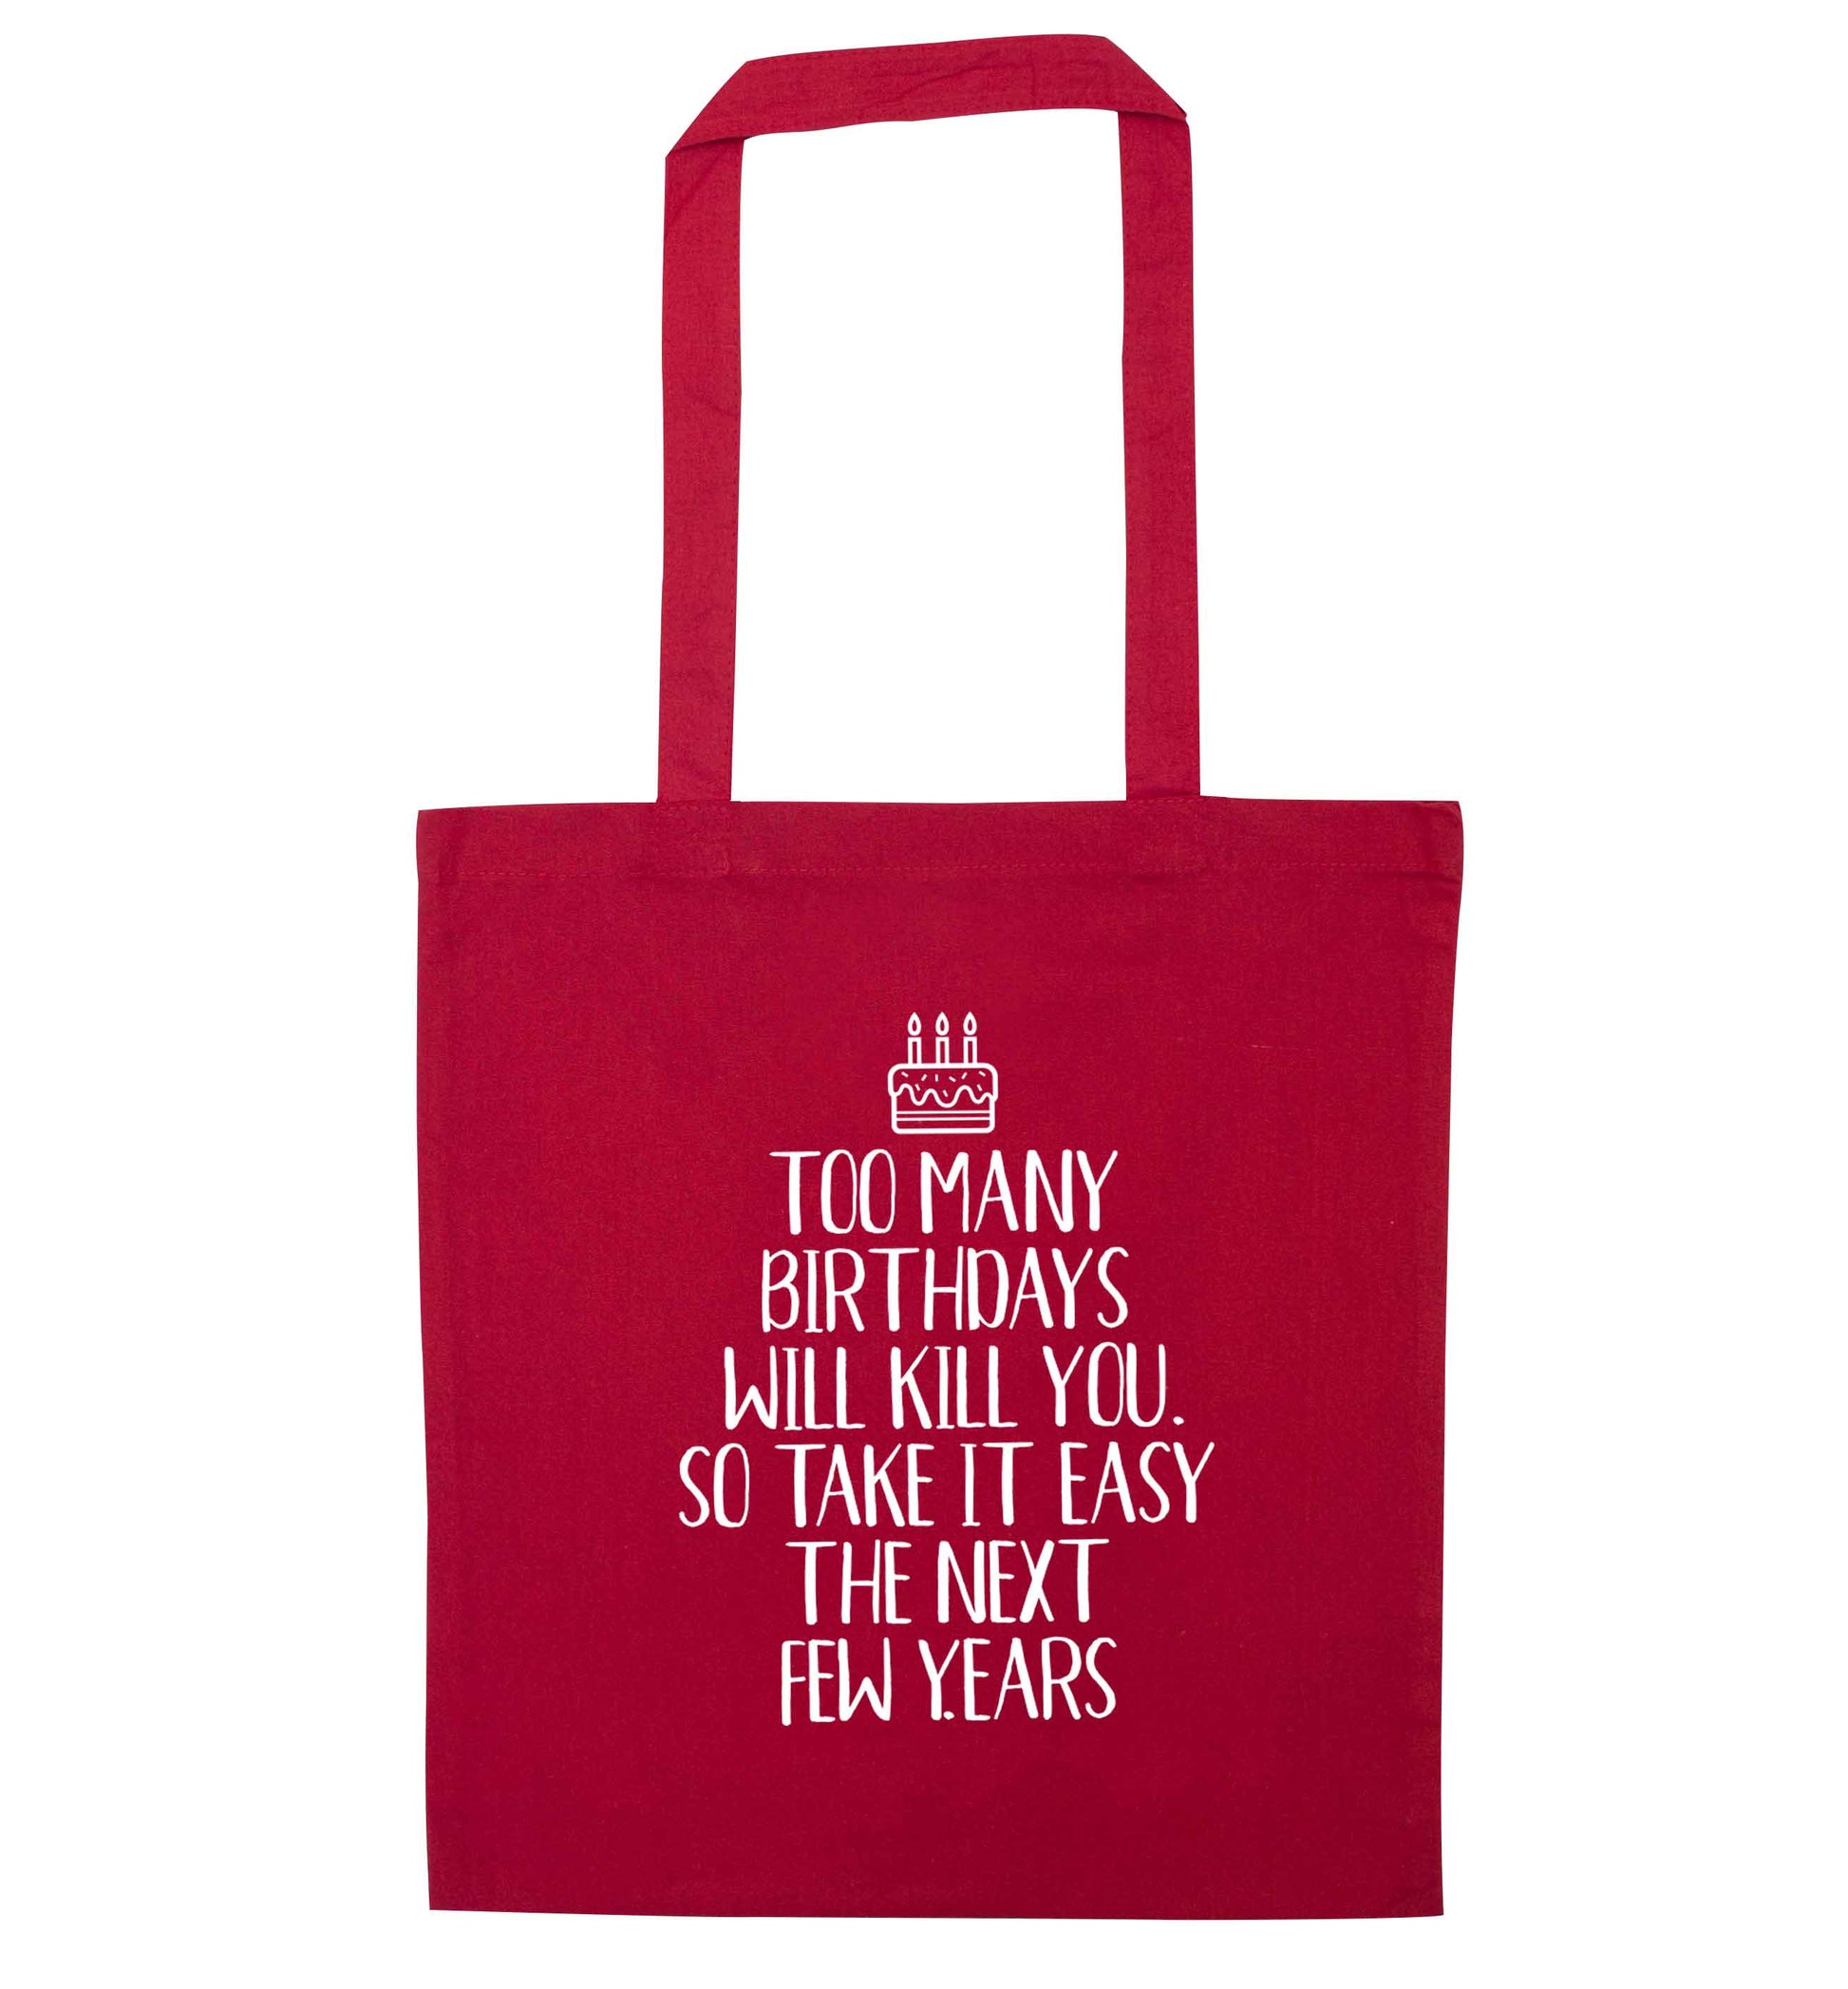 Too many birthdays will kill you so take it easy red tote bag